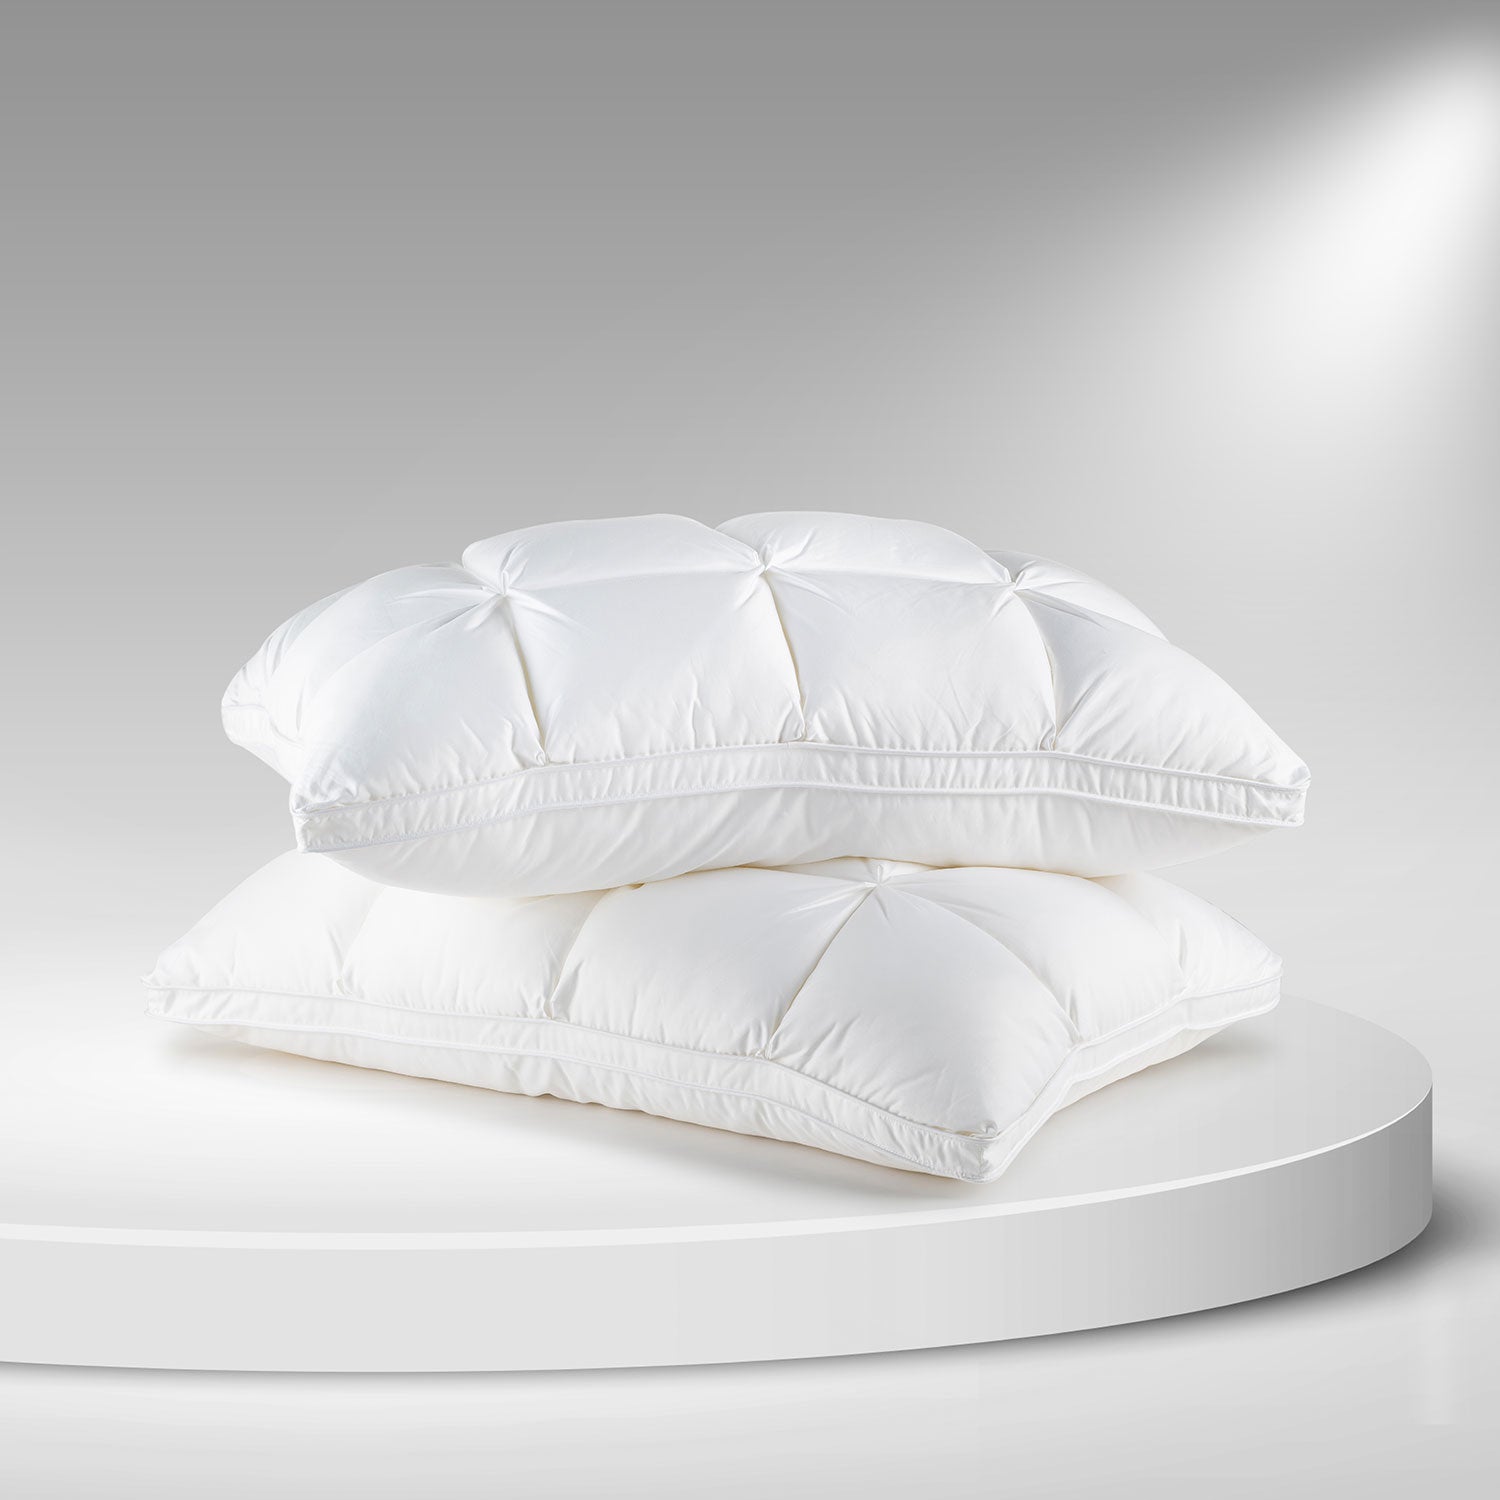 Cervical 3 Layer Hypoallergic Pillow| Cervical Pillow Price